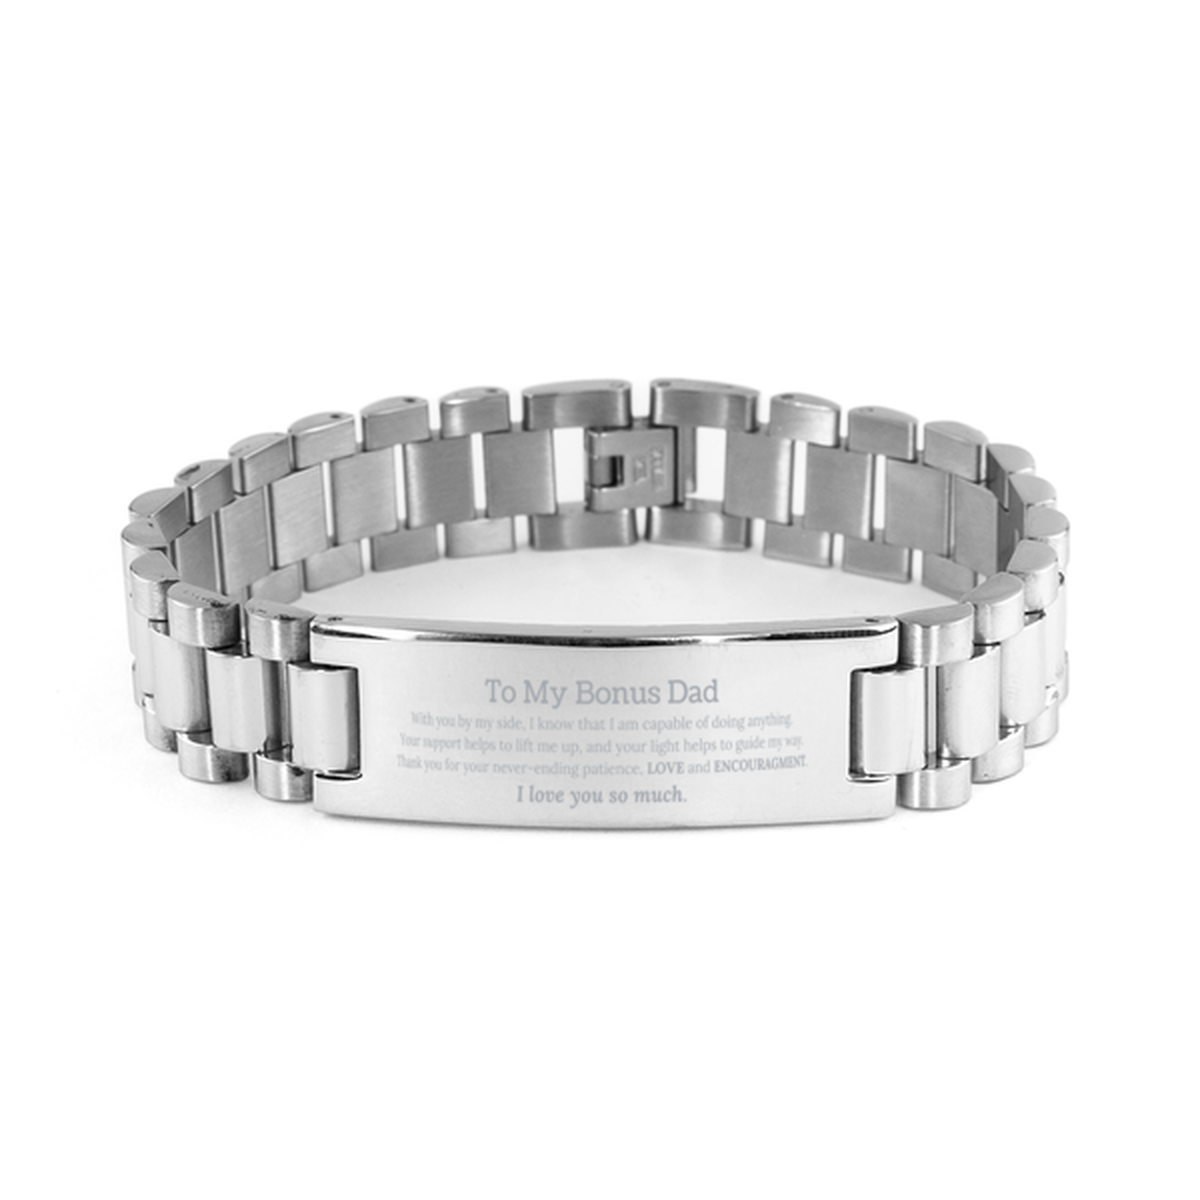 Appreciation Bonus Dad Ladder Stainless Steel Bracelet Gifts, To My Bonus Dad Birthday Christmas Wedding Keepsake Gifts for Bonus Dad With you by my side, I know that I am capable of doing anything. I love you so much